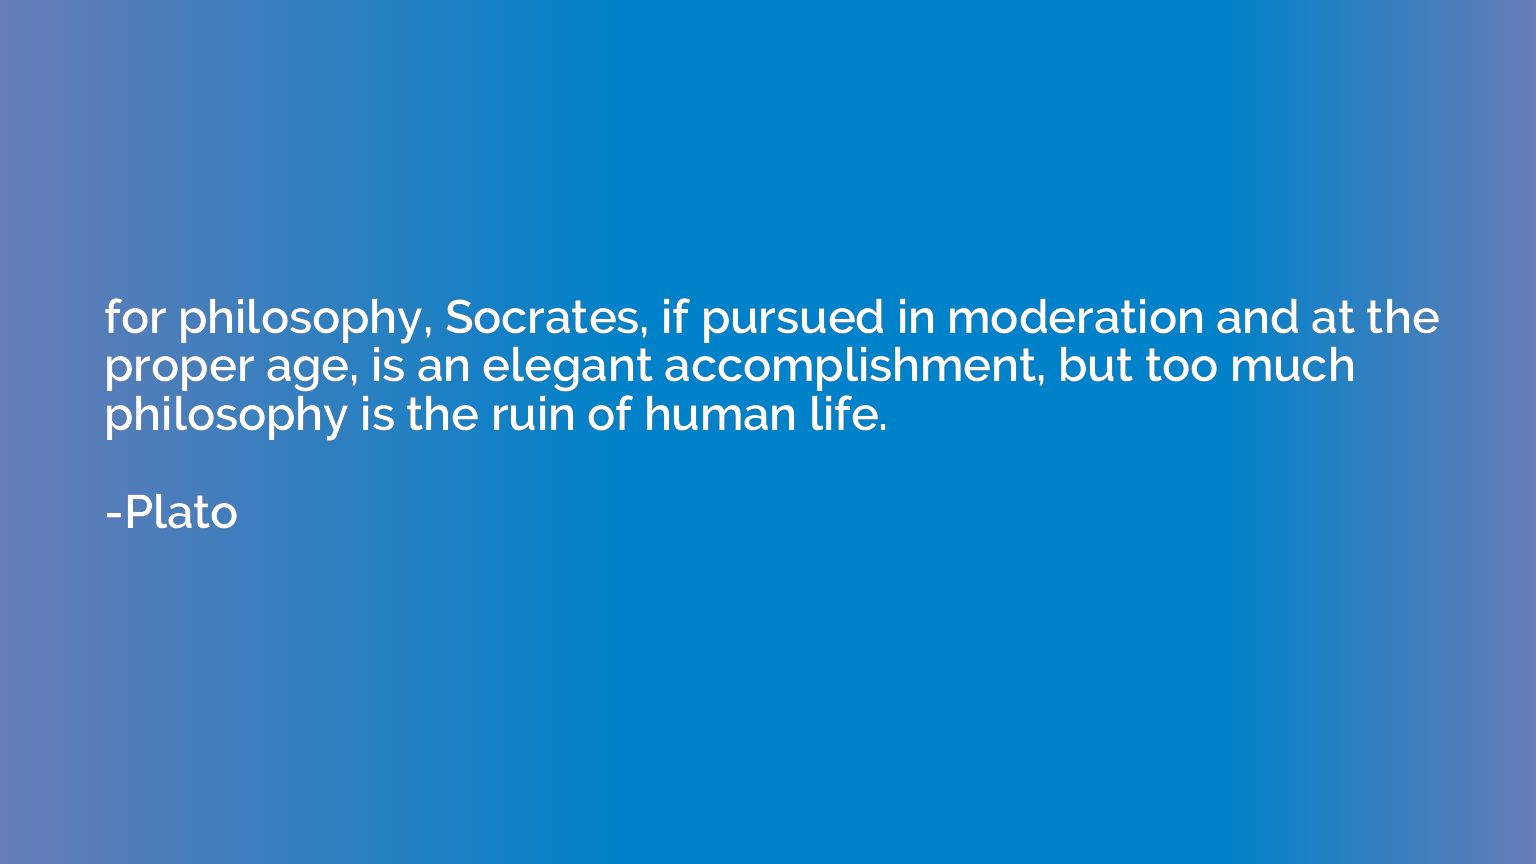 for philosophy, Socrates, if pursued in moderation and at th